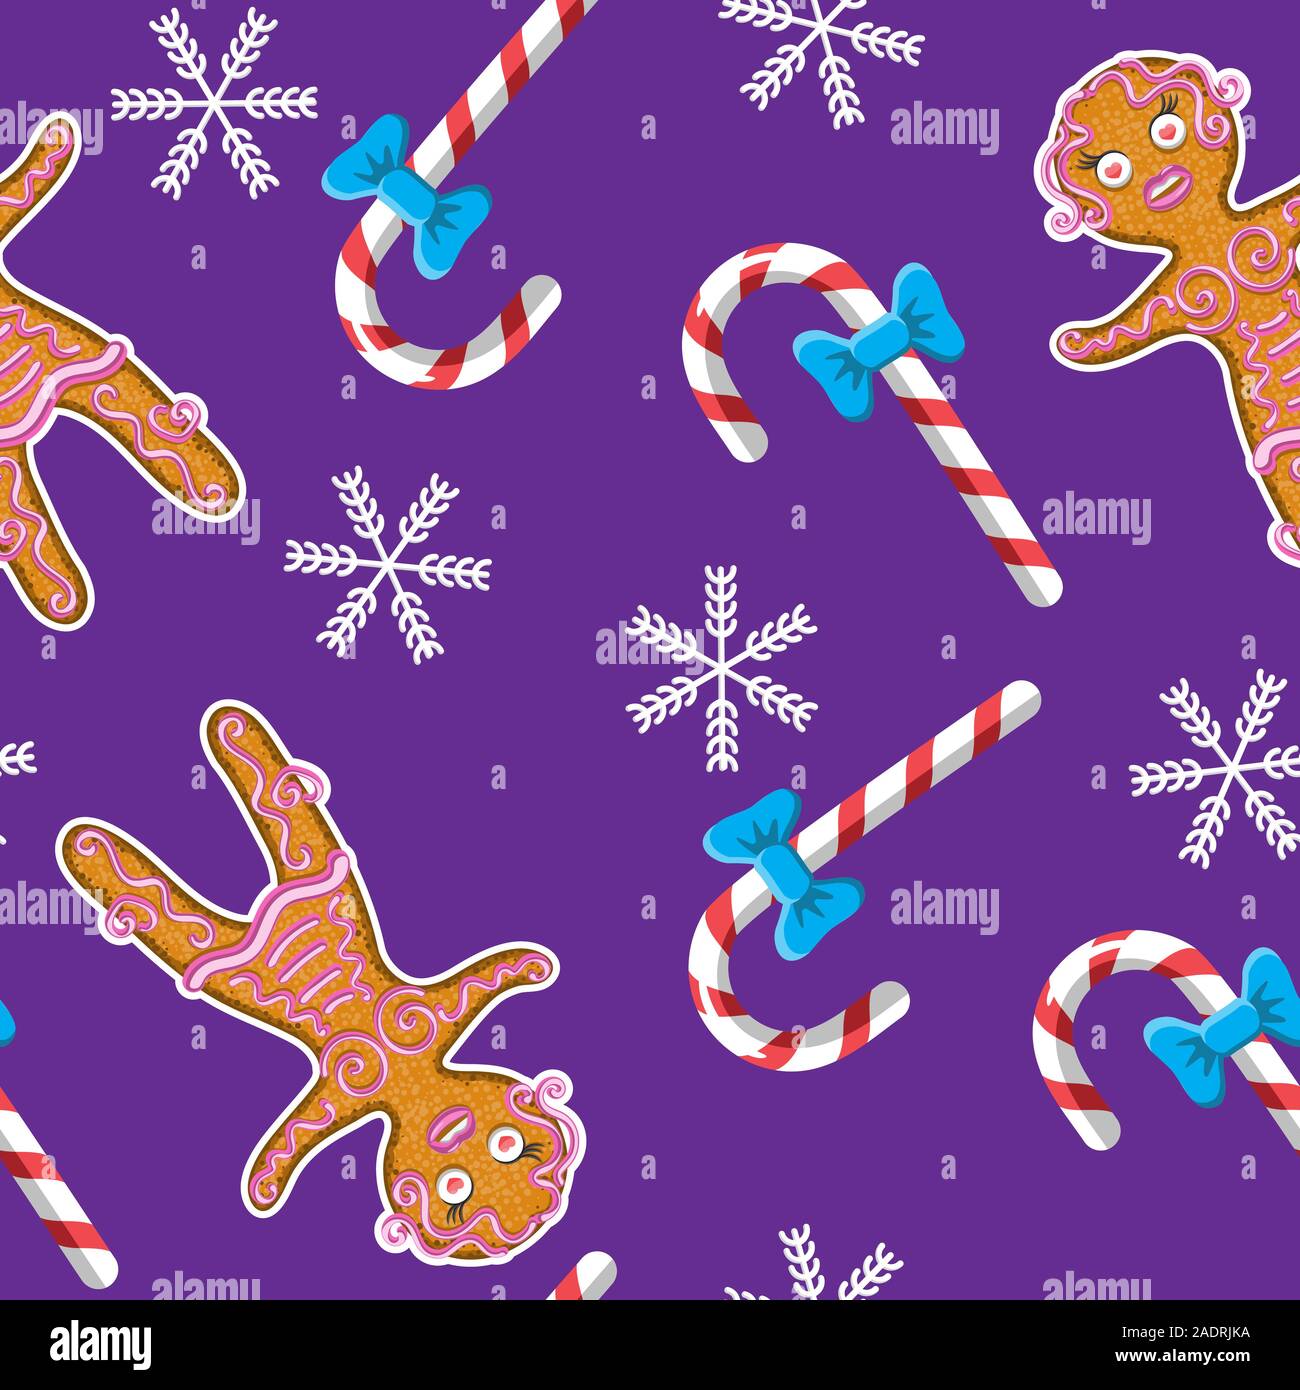 Seamless background with gingerbread man and candy snowflake on purple background. Vector image. Stock Vector